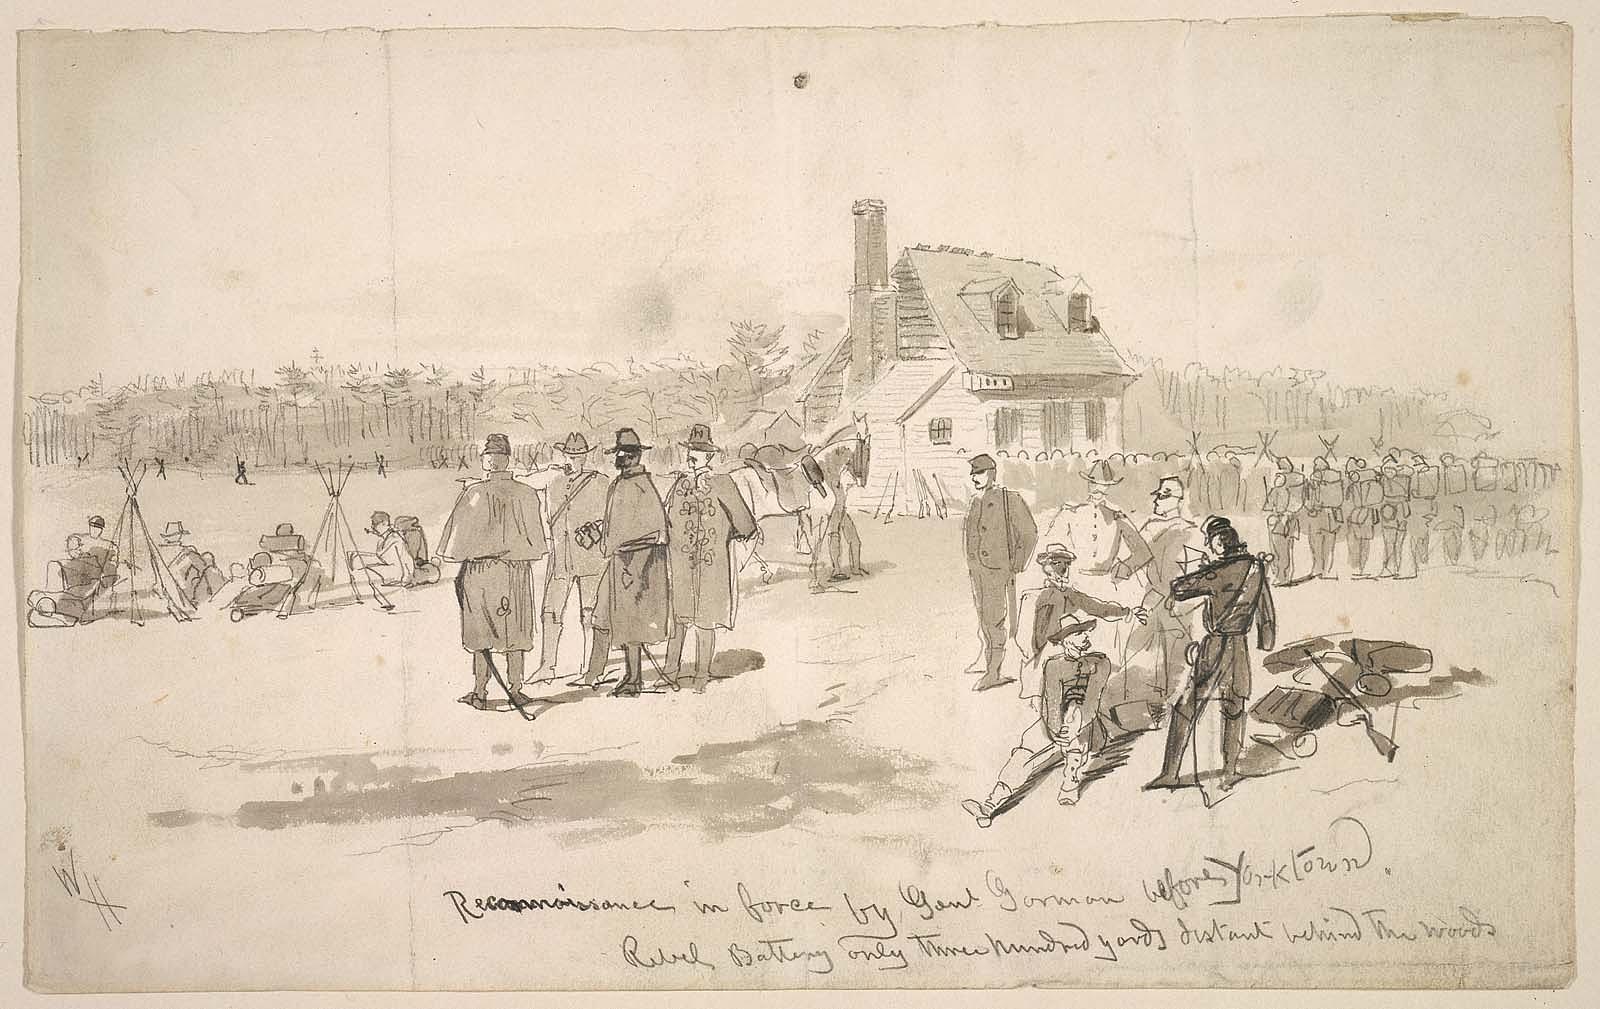 Winslow Homer, Reconnaissance in force by General Gorman before Yorktown, 1862, graphite with brush and gray wash on cream wove paper, 21 x 33.7 cm (Museum of Fine Arts, Boston)